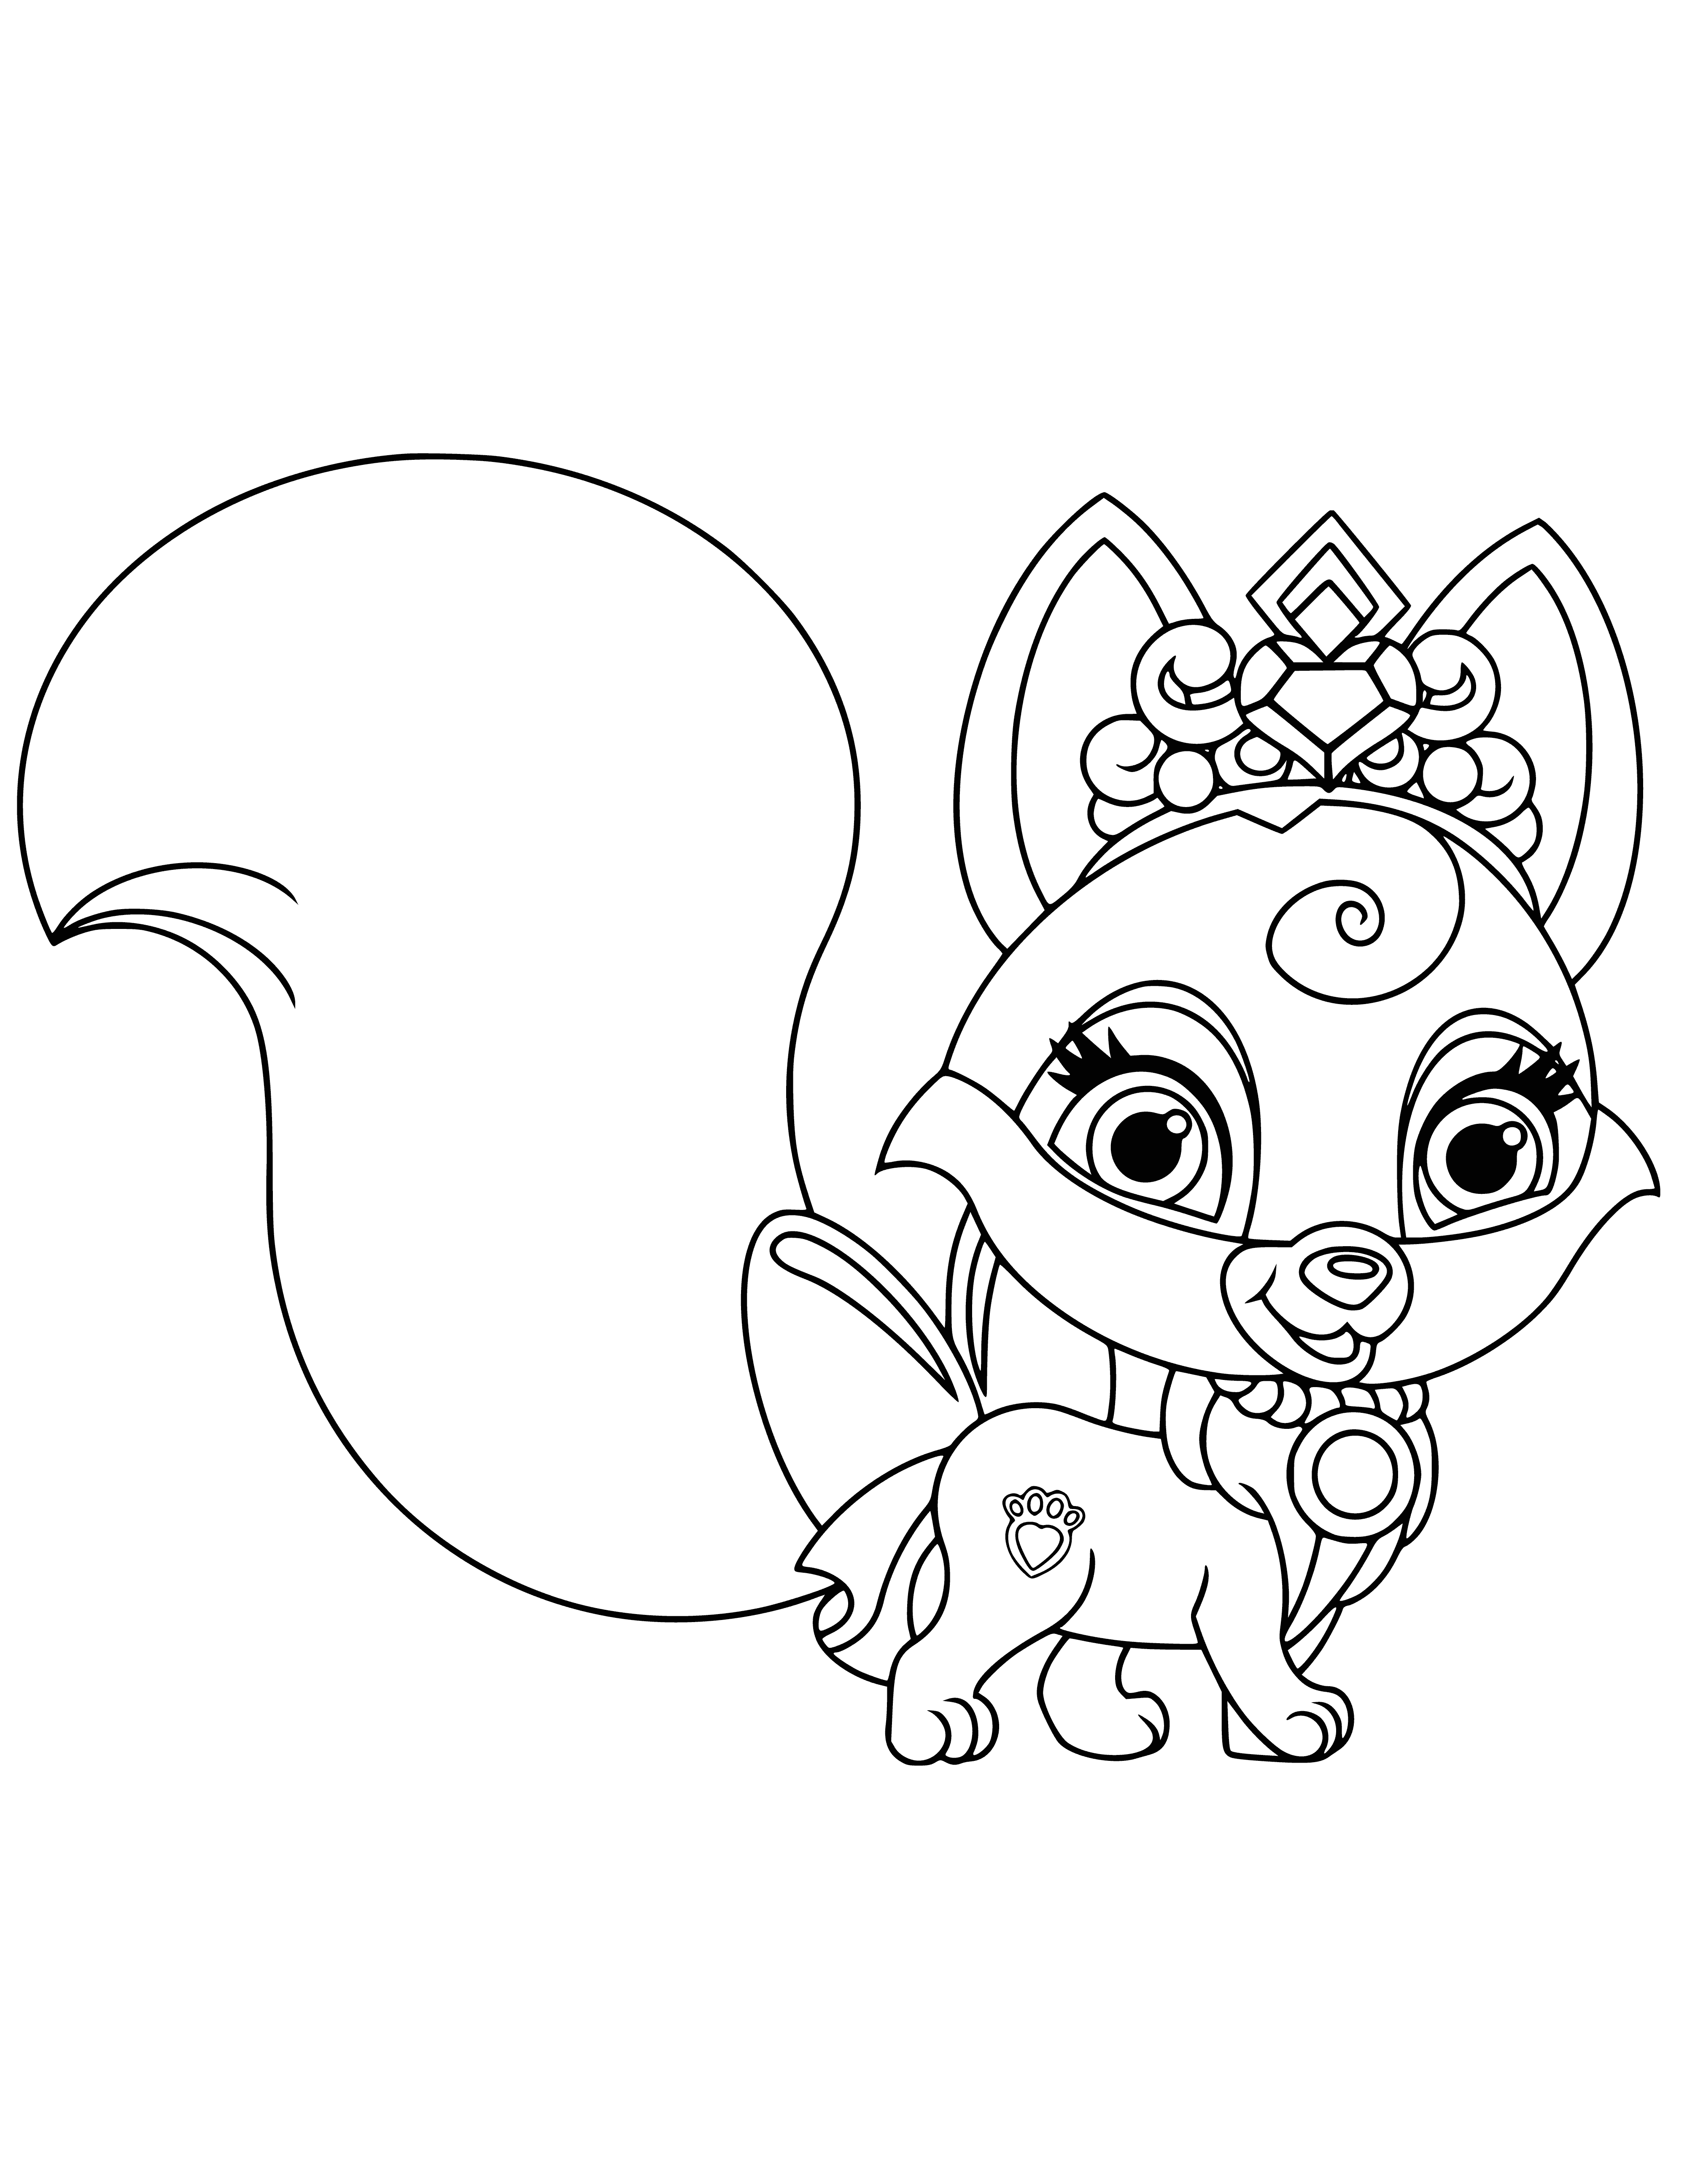 coloring page: A small fox-like animal sits on a red cushion wearing a gold crown. Brown with white underside and fluffy tail.